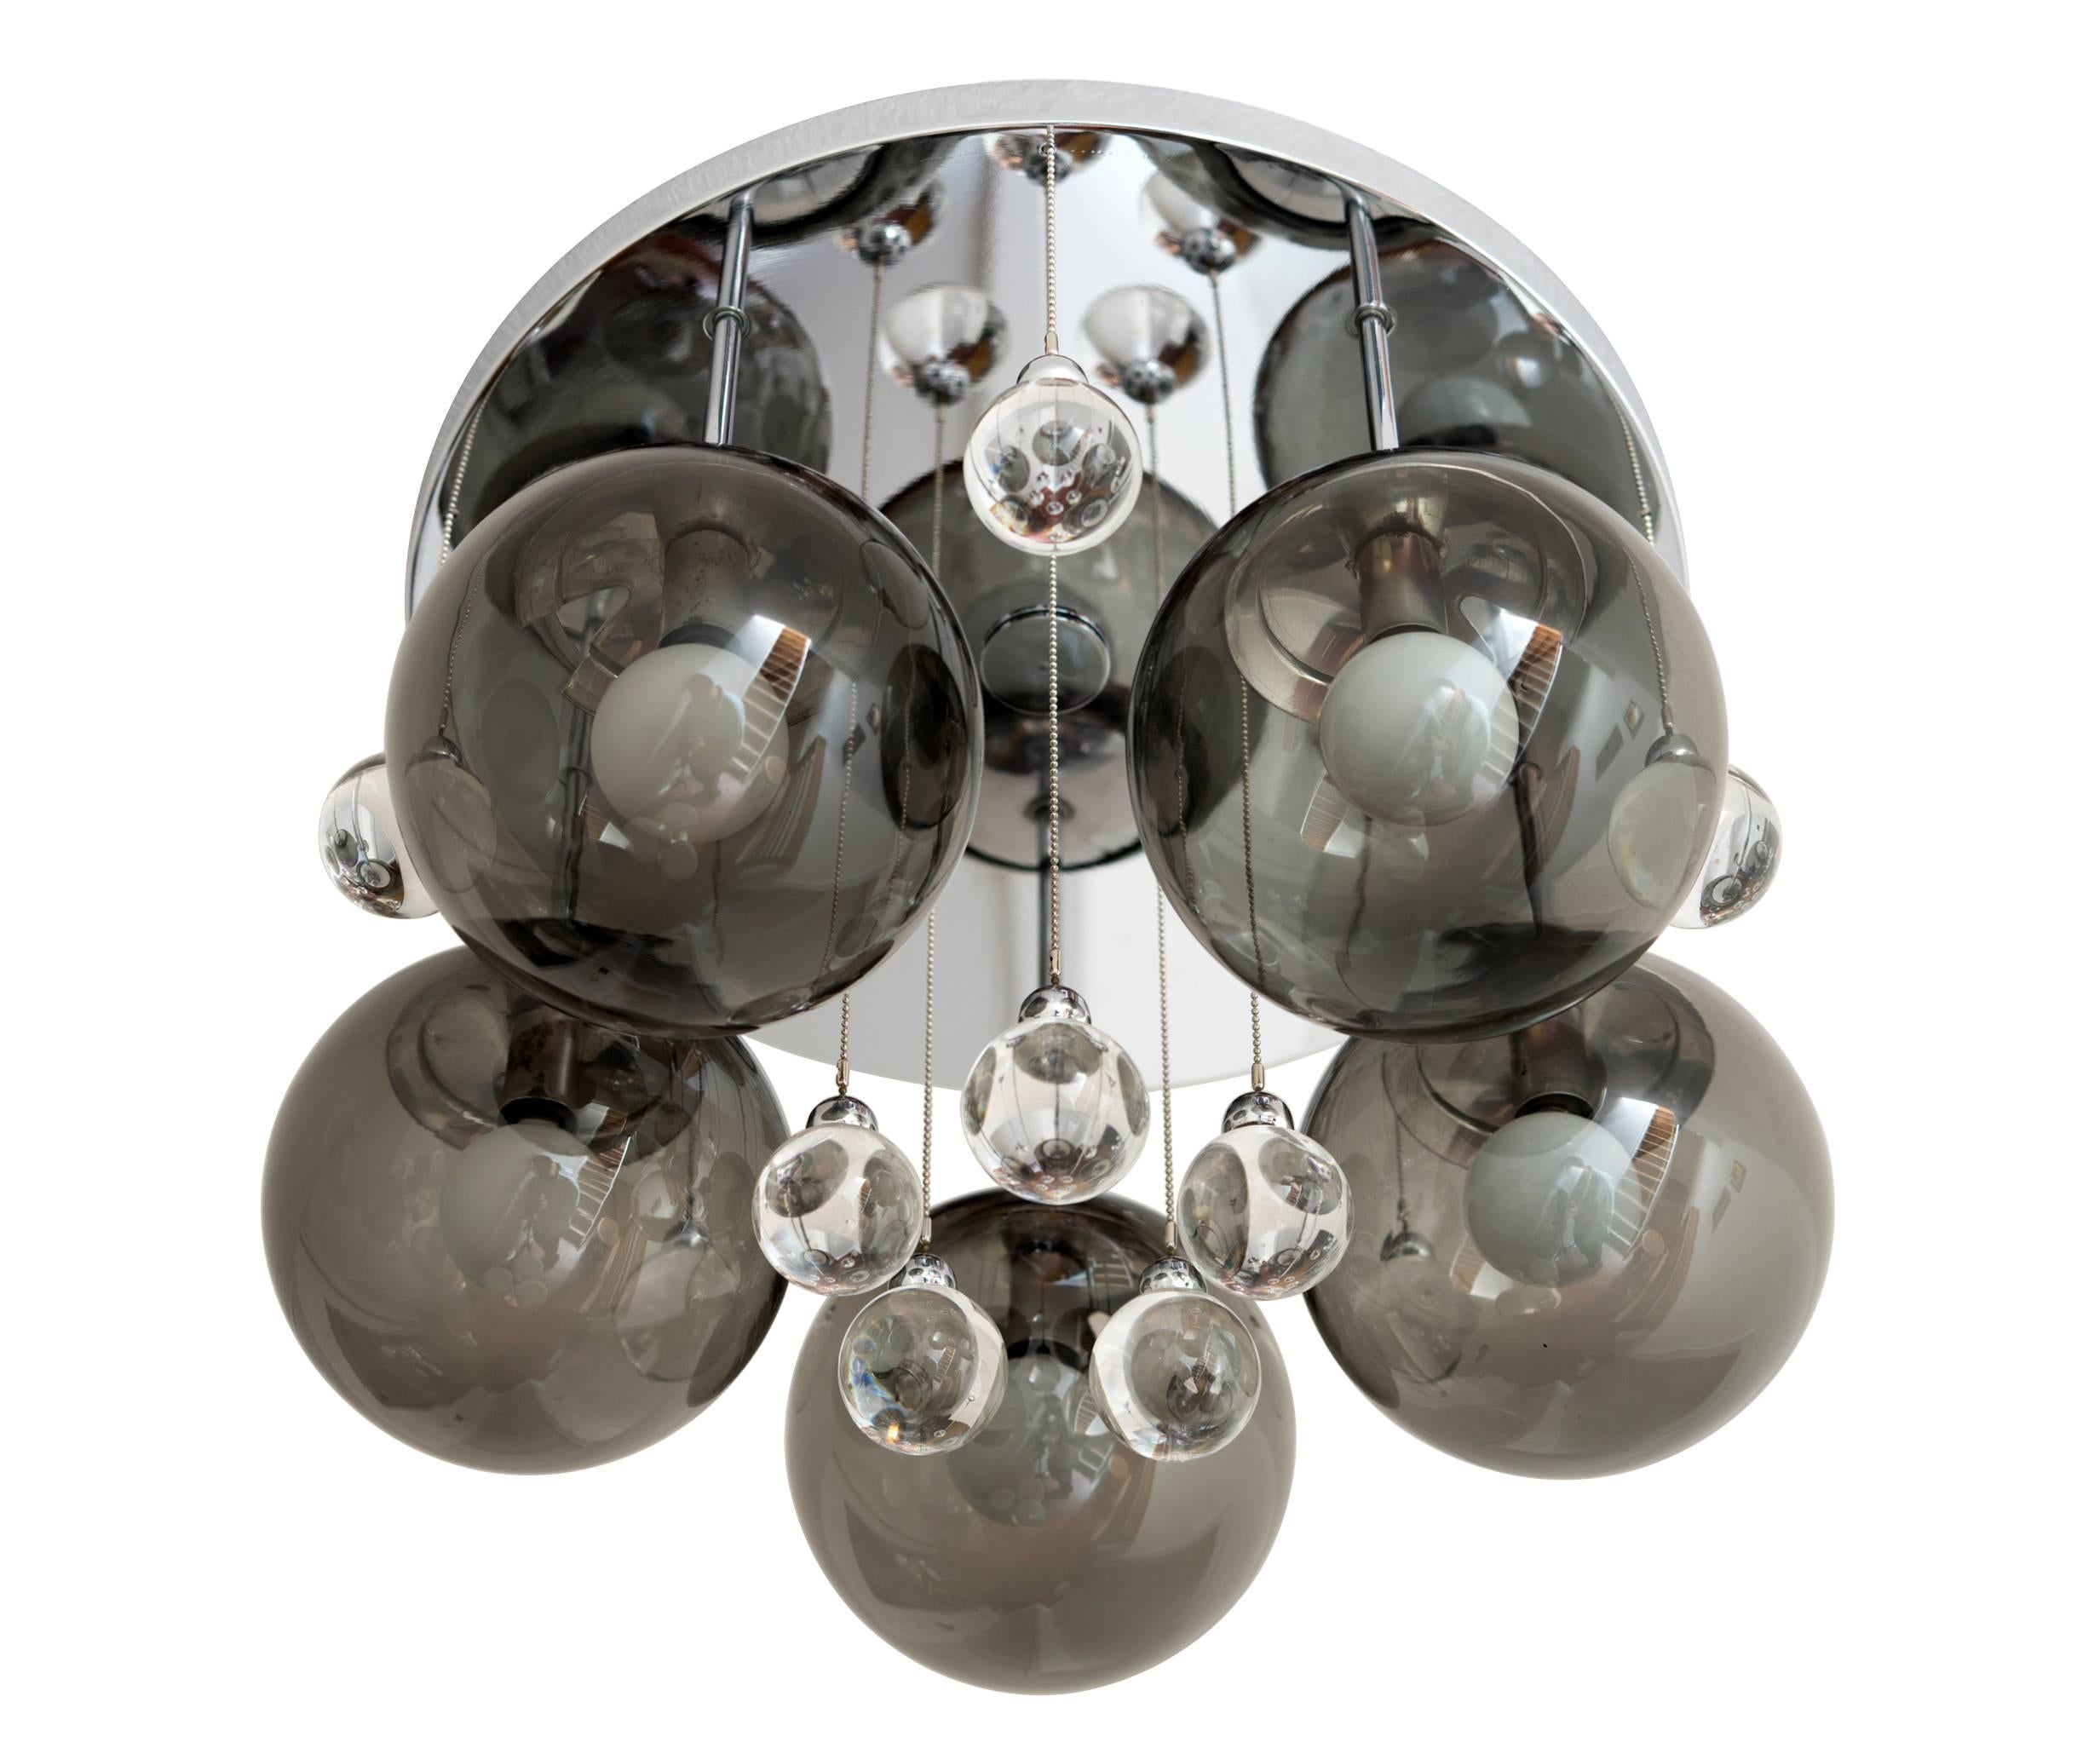 A striking pair available of 1960s flush mount light fixtures or chandeliers with polished chrome frames, each supporting five pendant lights with smoked, blown glass shades and ten solid glass 'bubbles' with chrome mounts and suspended by ball